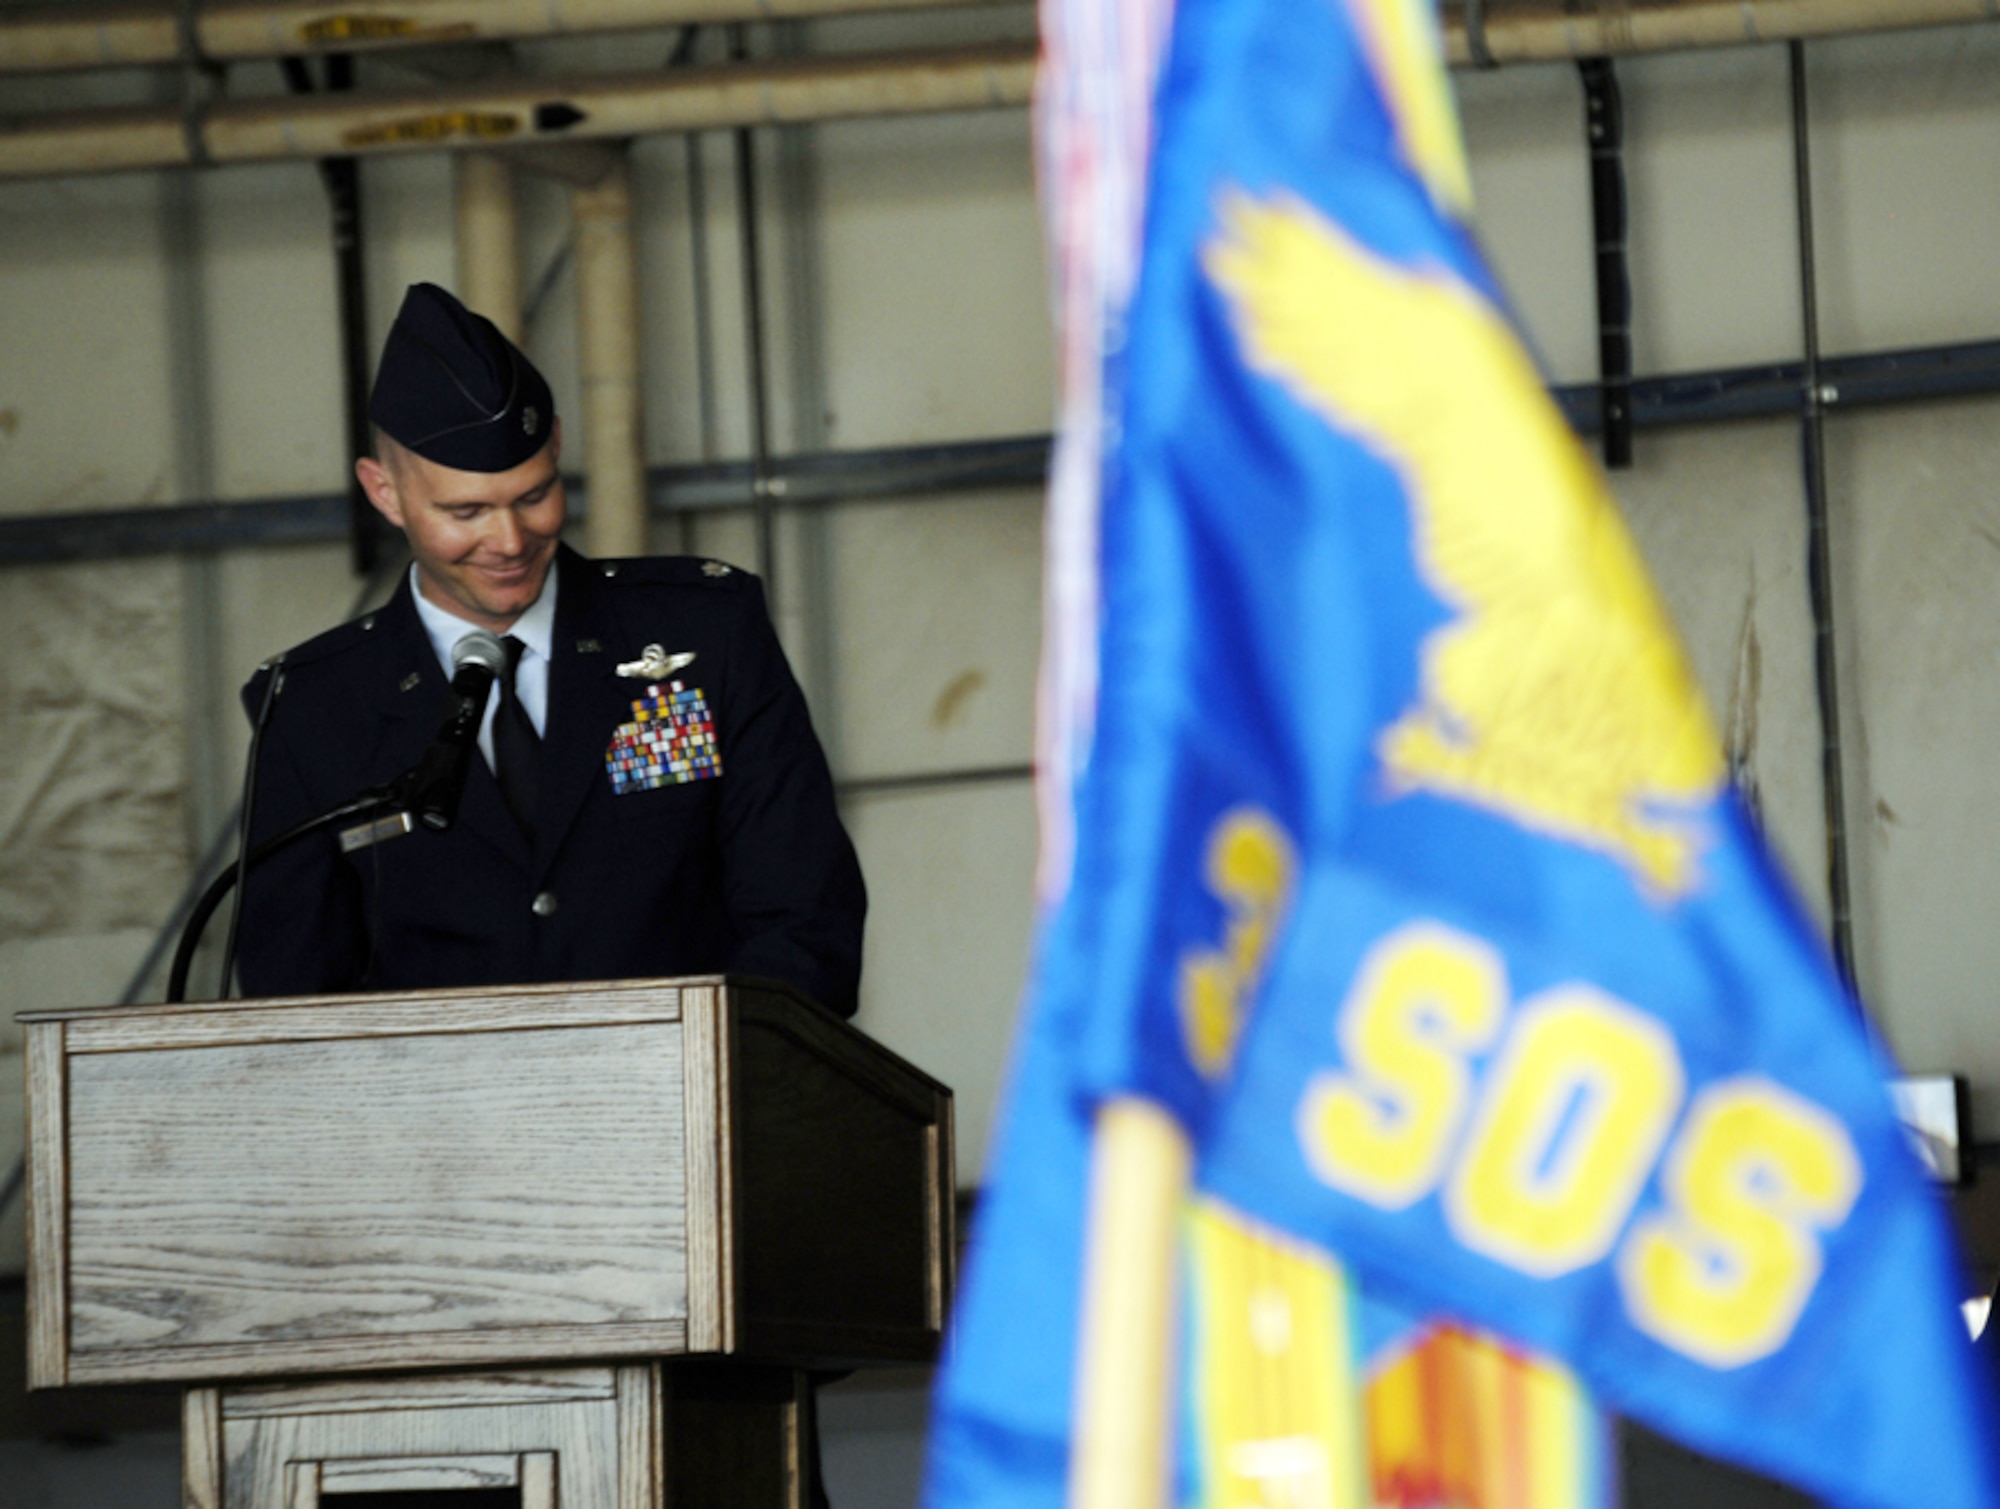 Lt. Col. Paul Calitgirone, 3rd Special Operations Squadron commander, speaks to his troops for the first time May 31. The 3rd SOS acquired a new commander and some Air Combat Command assets that nearly doubled the squadron's size. (U.S. Air Force photo by Staff Sgt. Orly Tyrell)